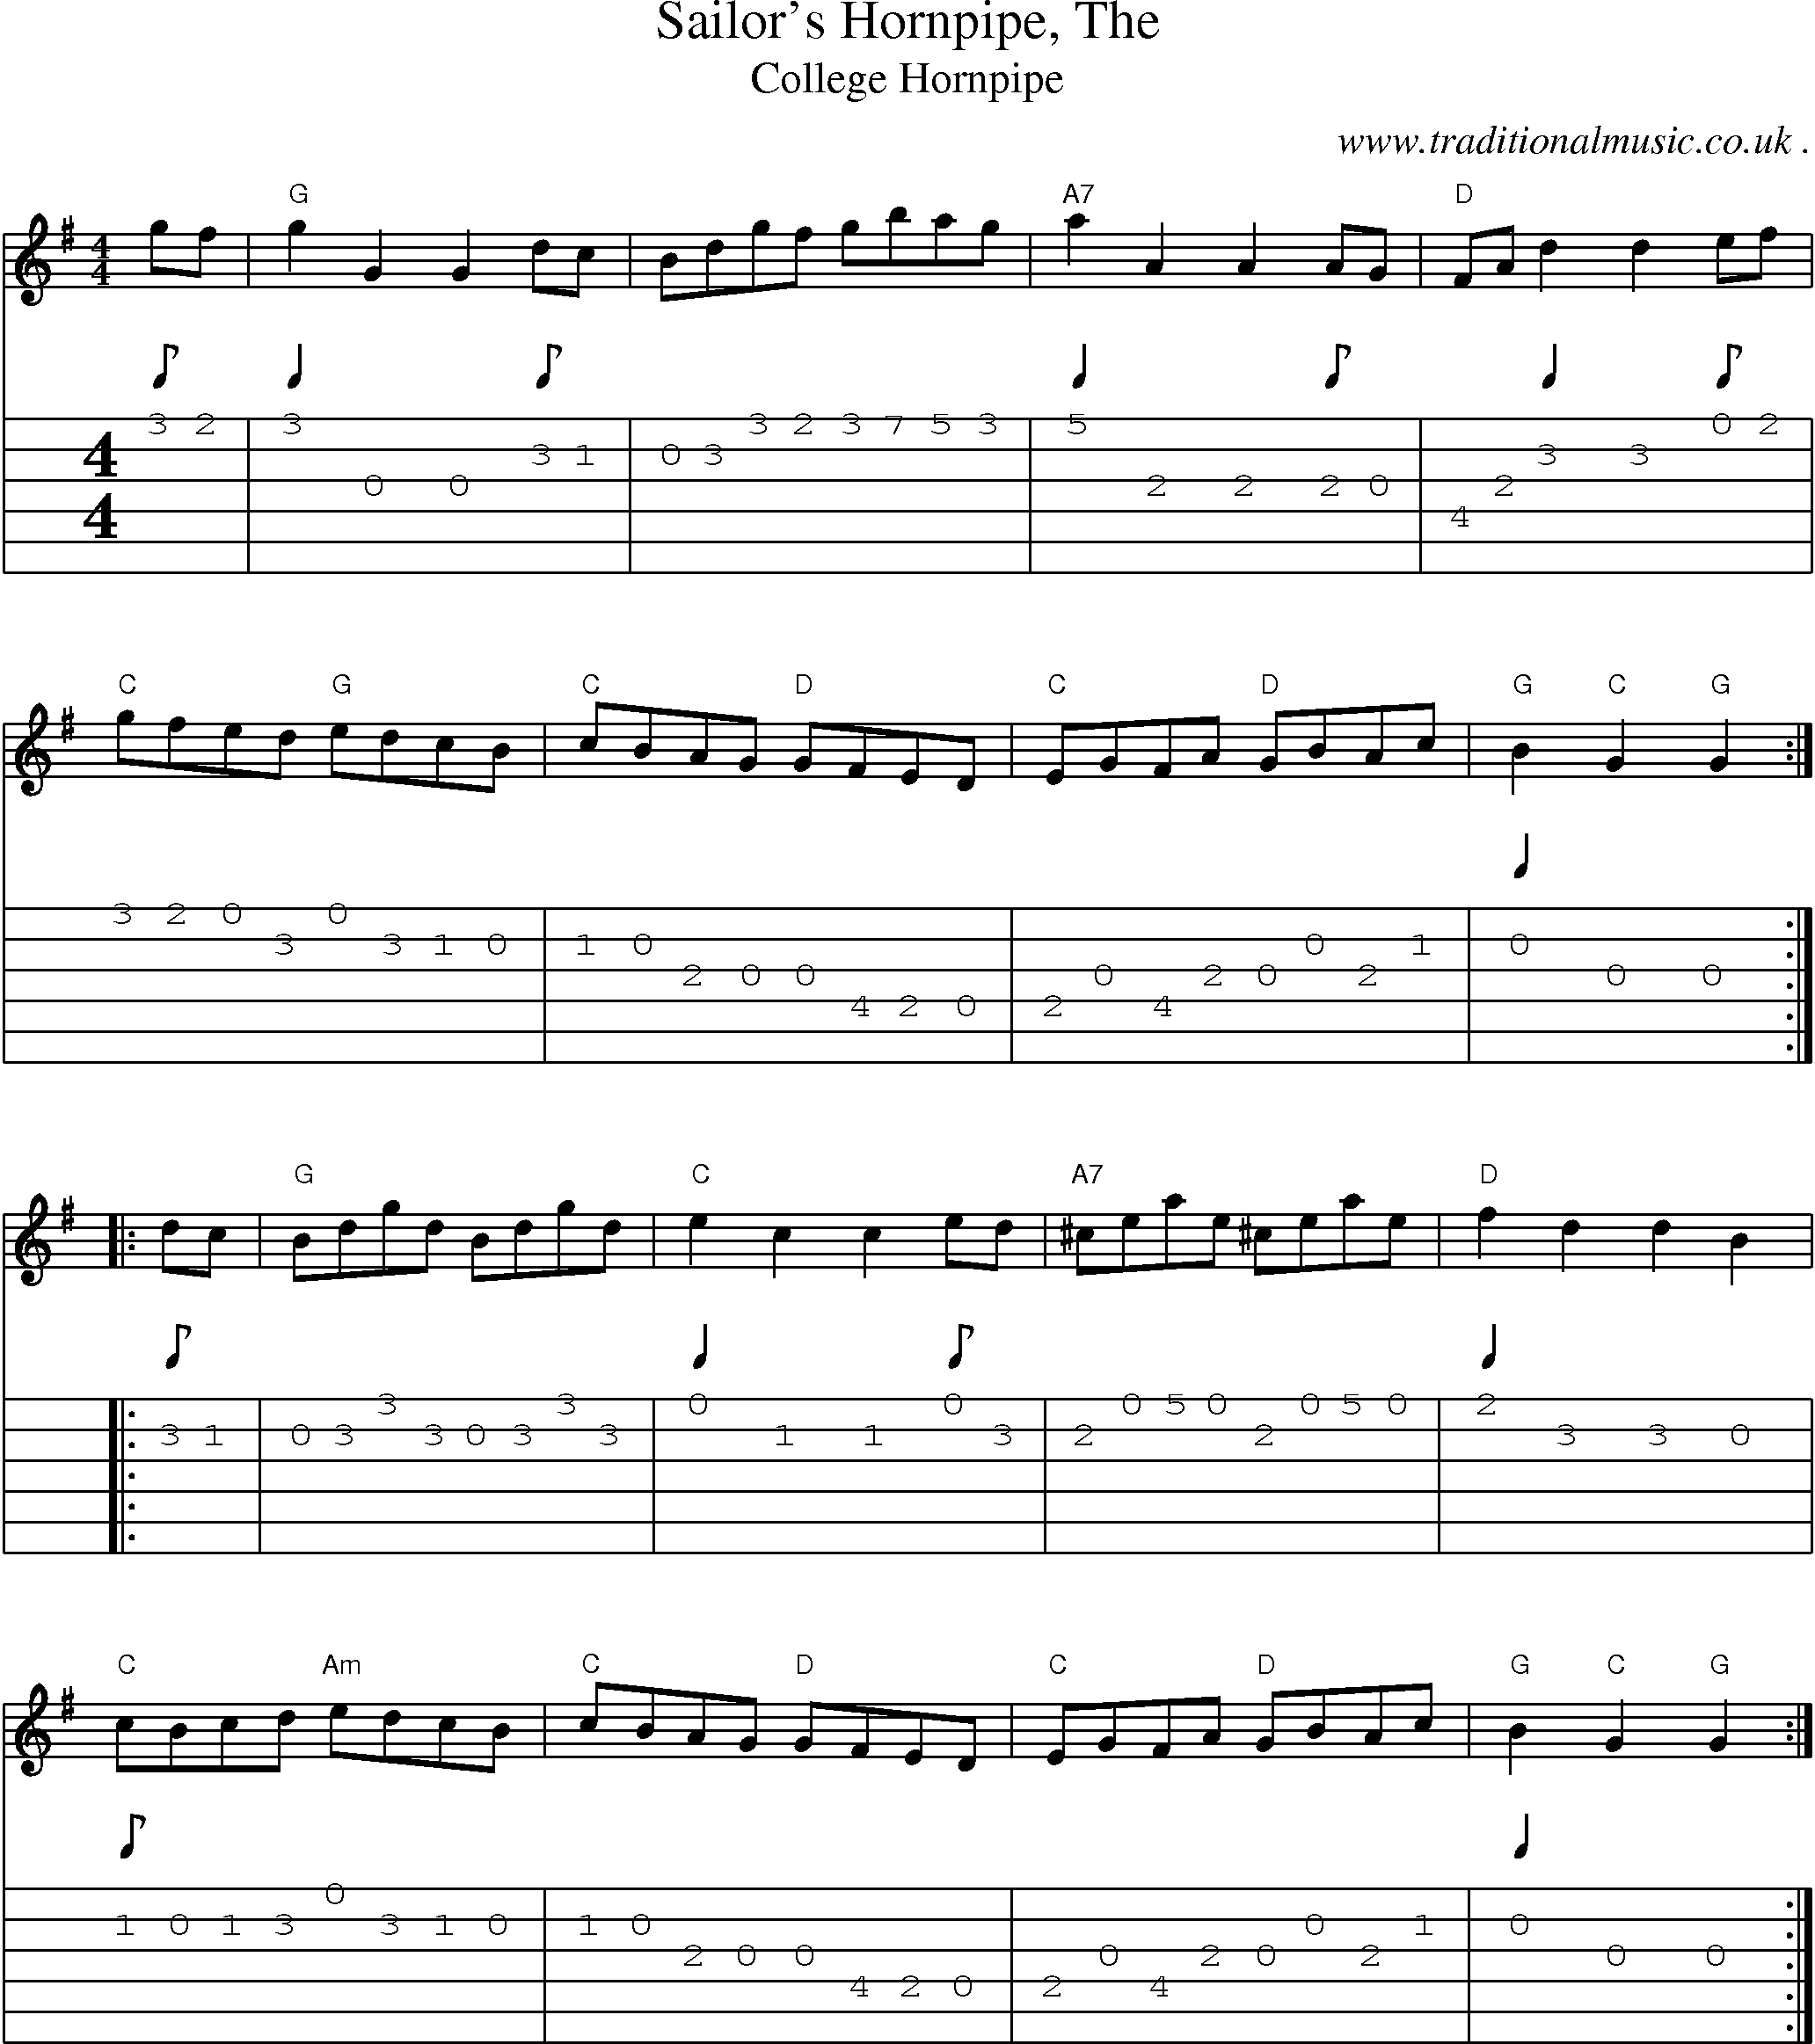 Music Score and Guitar Tabs for Sailors Hornpipe The1